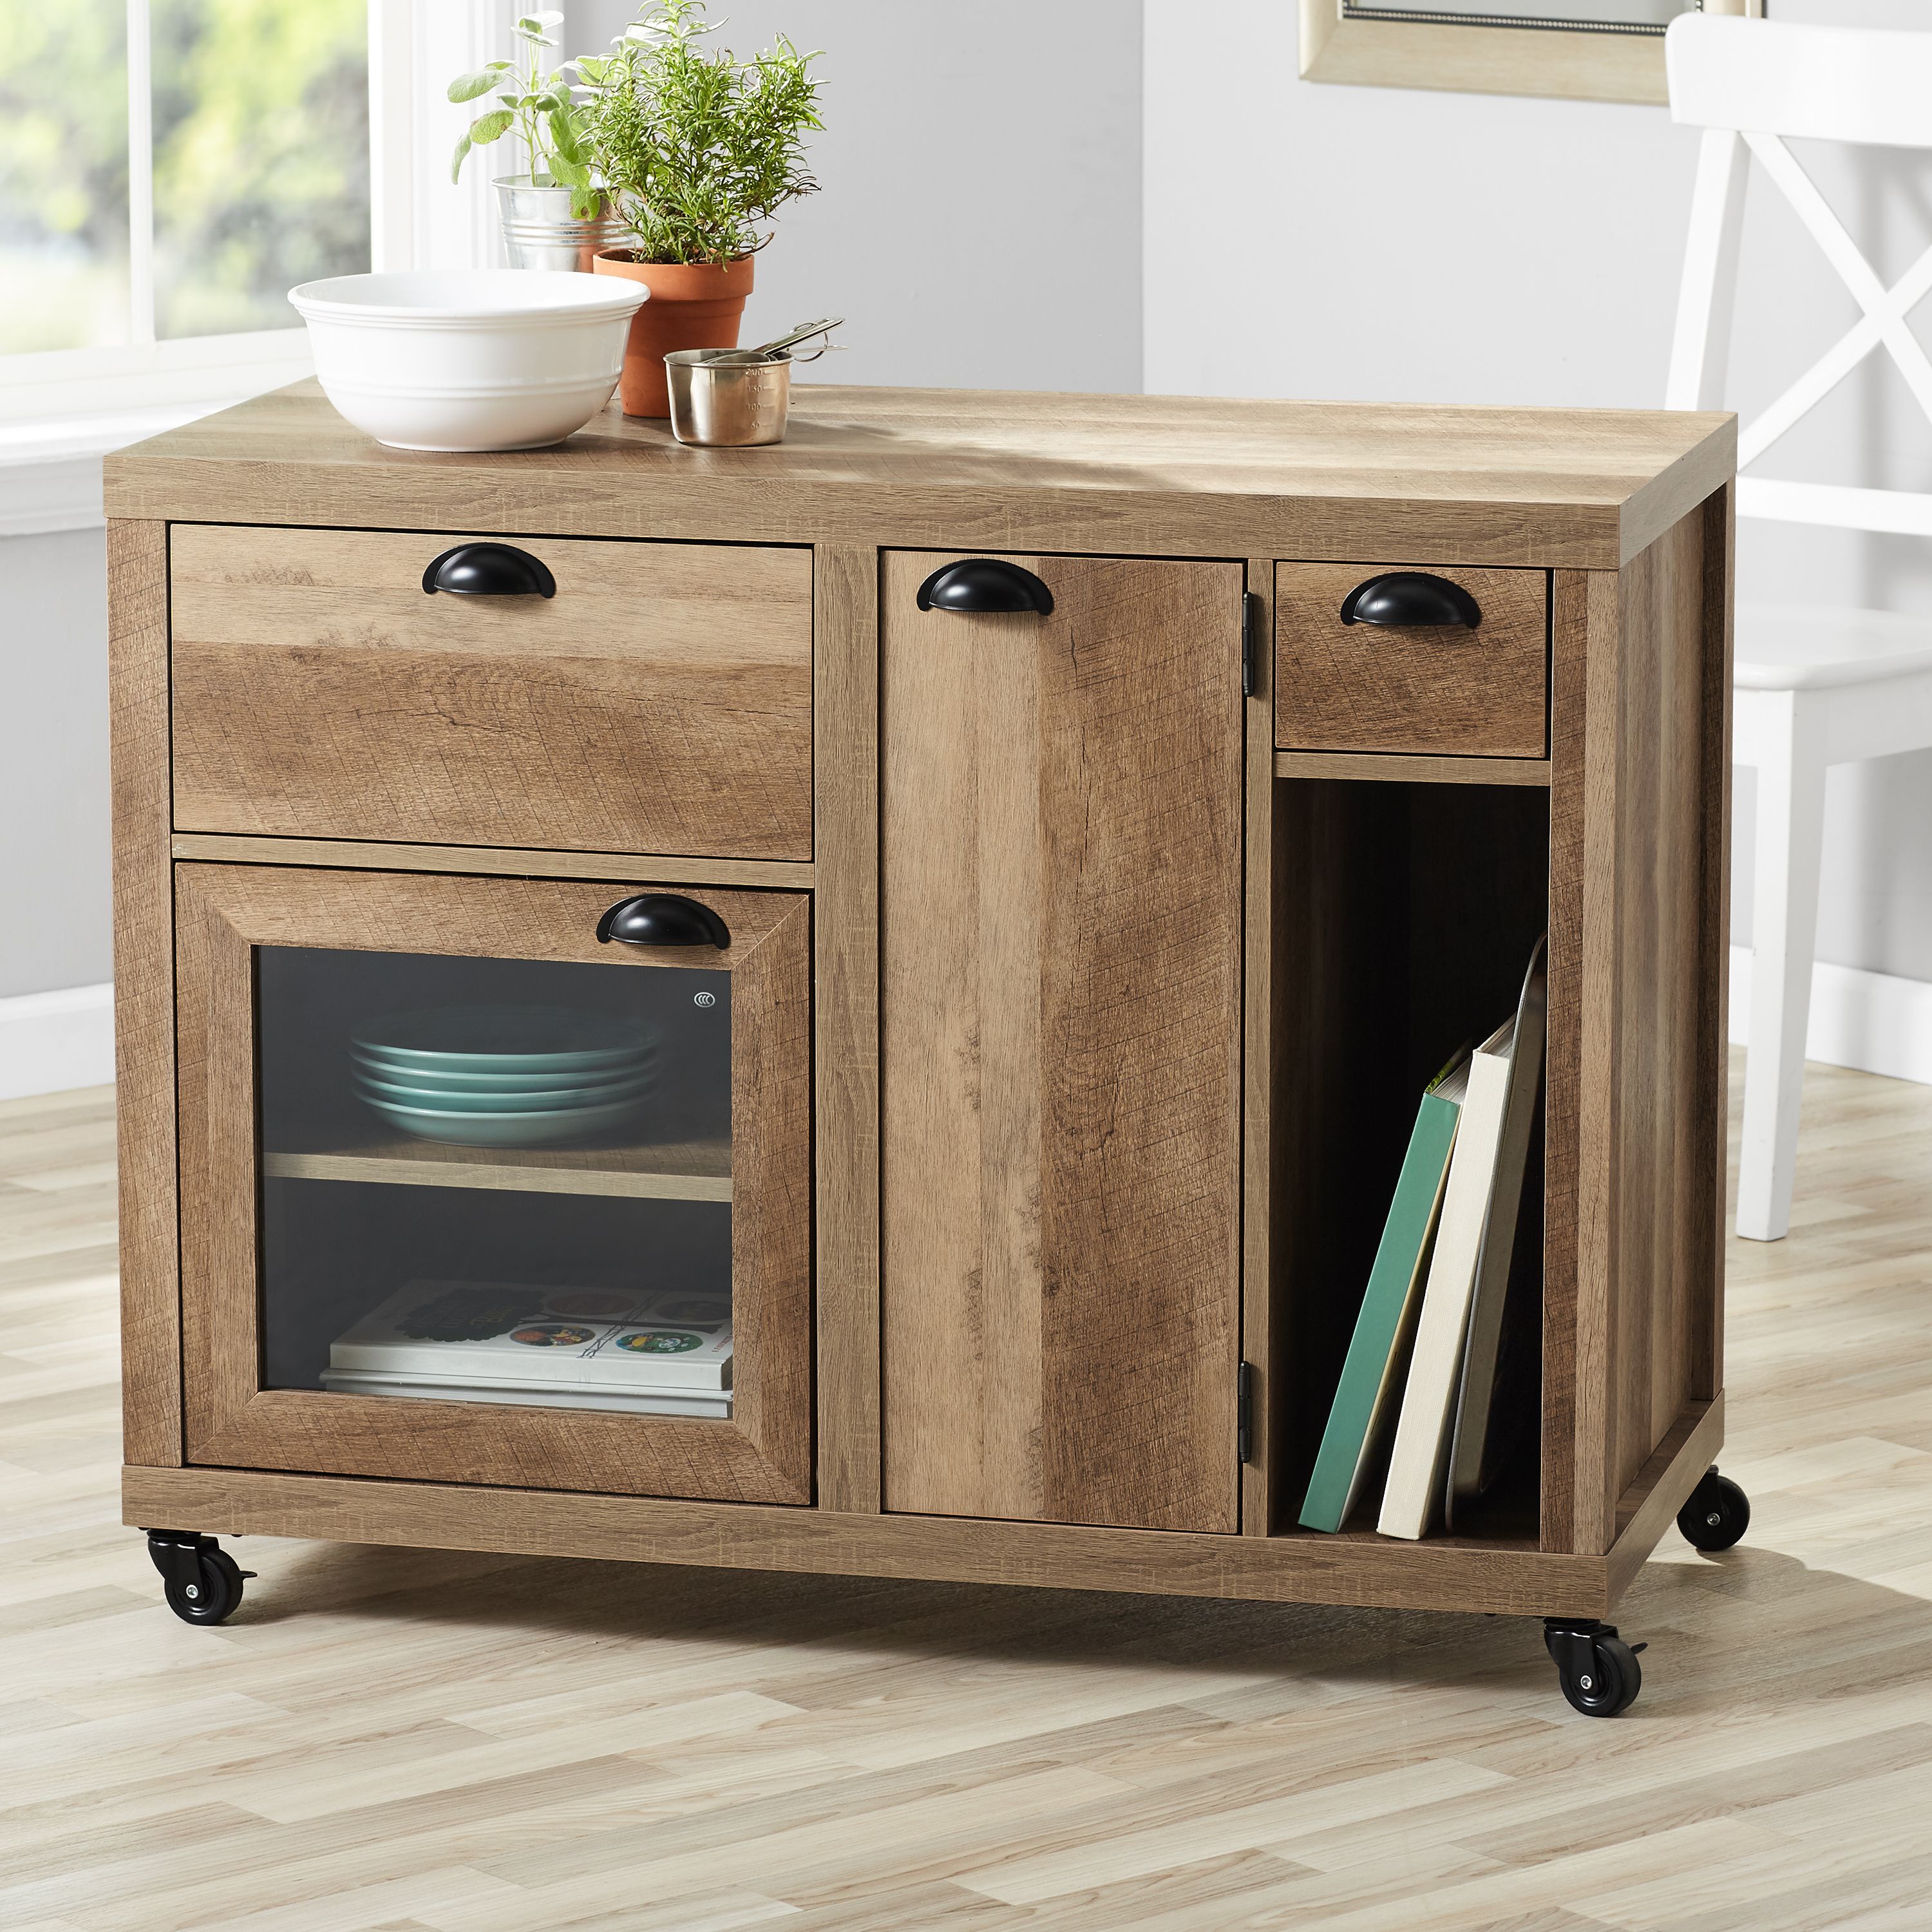 Better Homes & Gardens Lucy Kitchen Cart, Weathered Wood - image 3 of 6